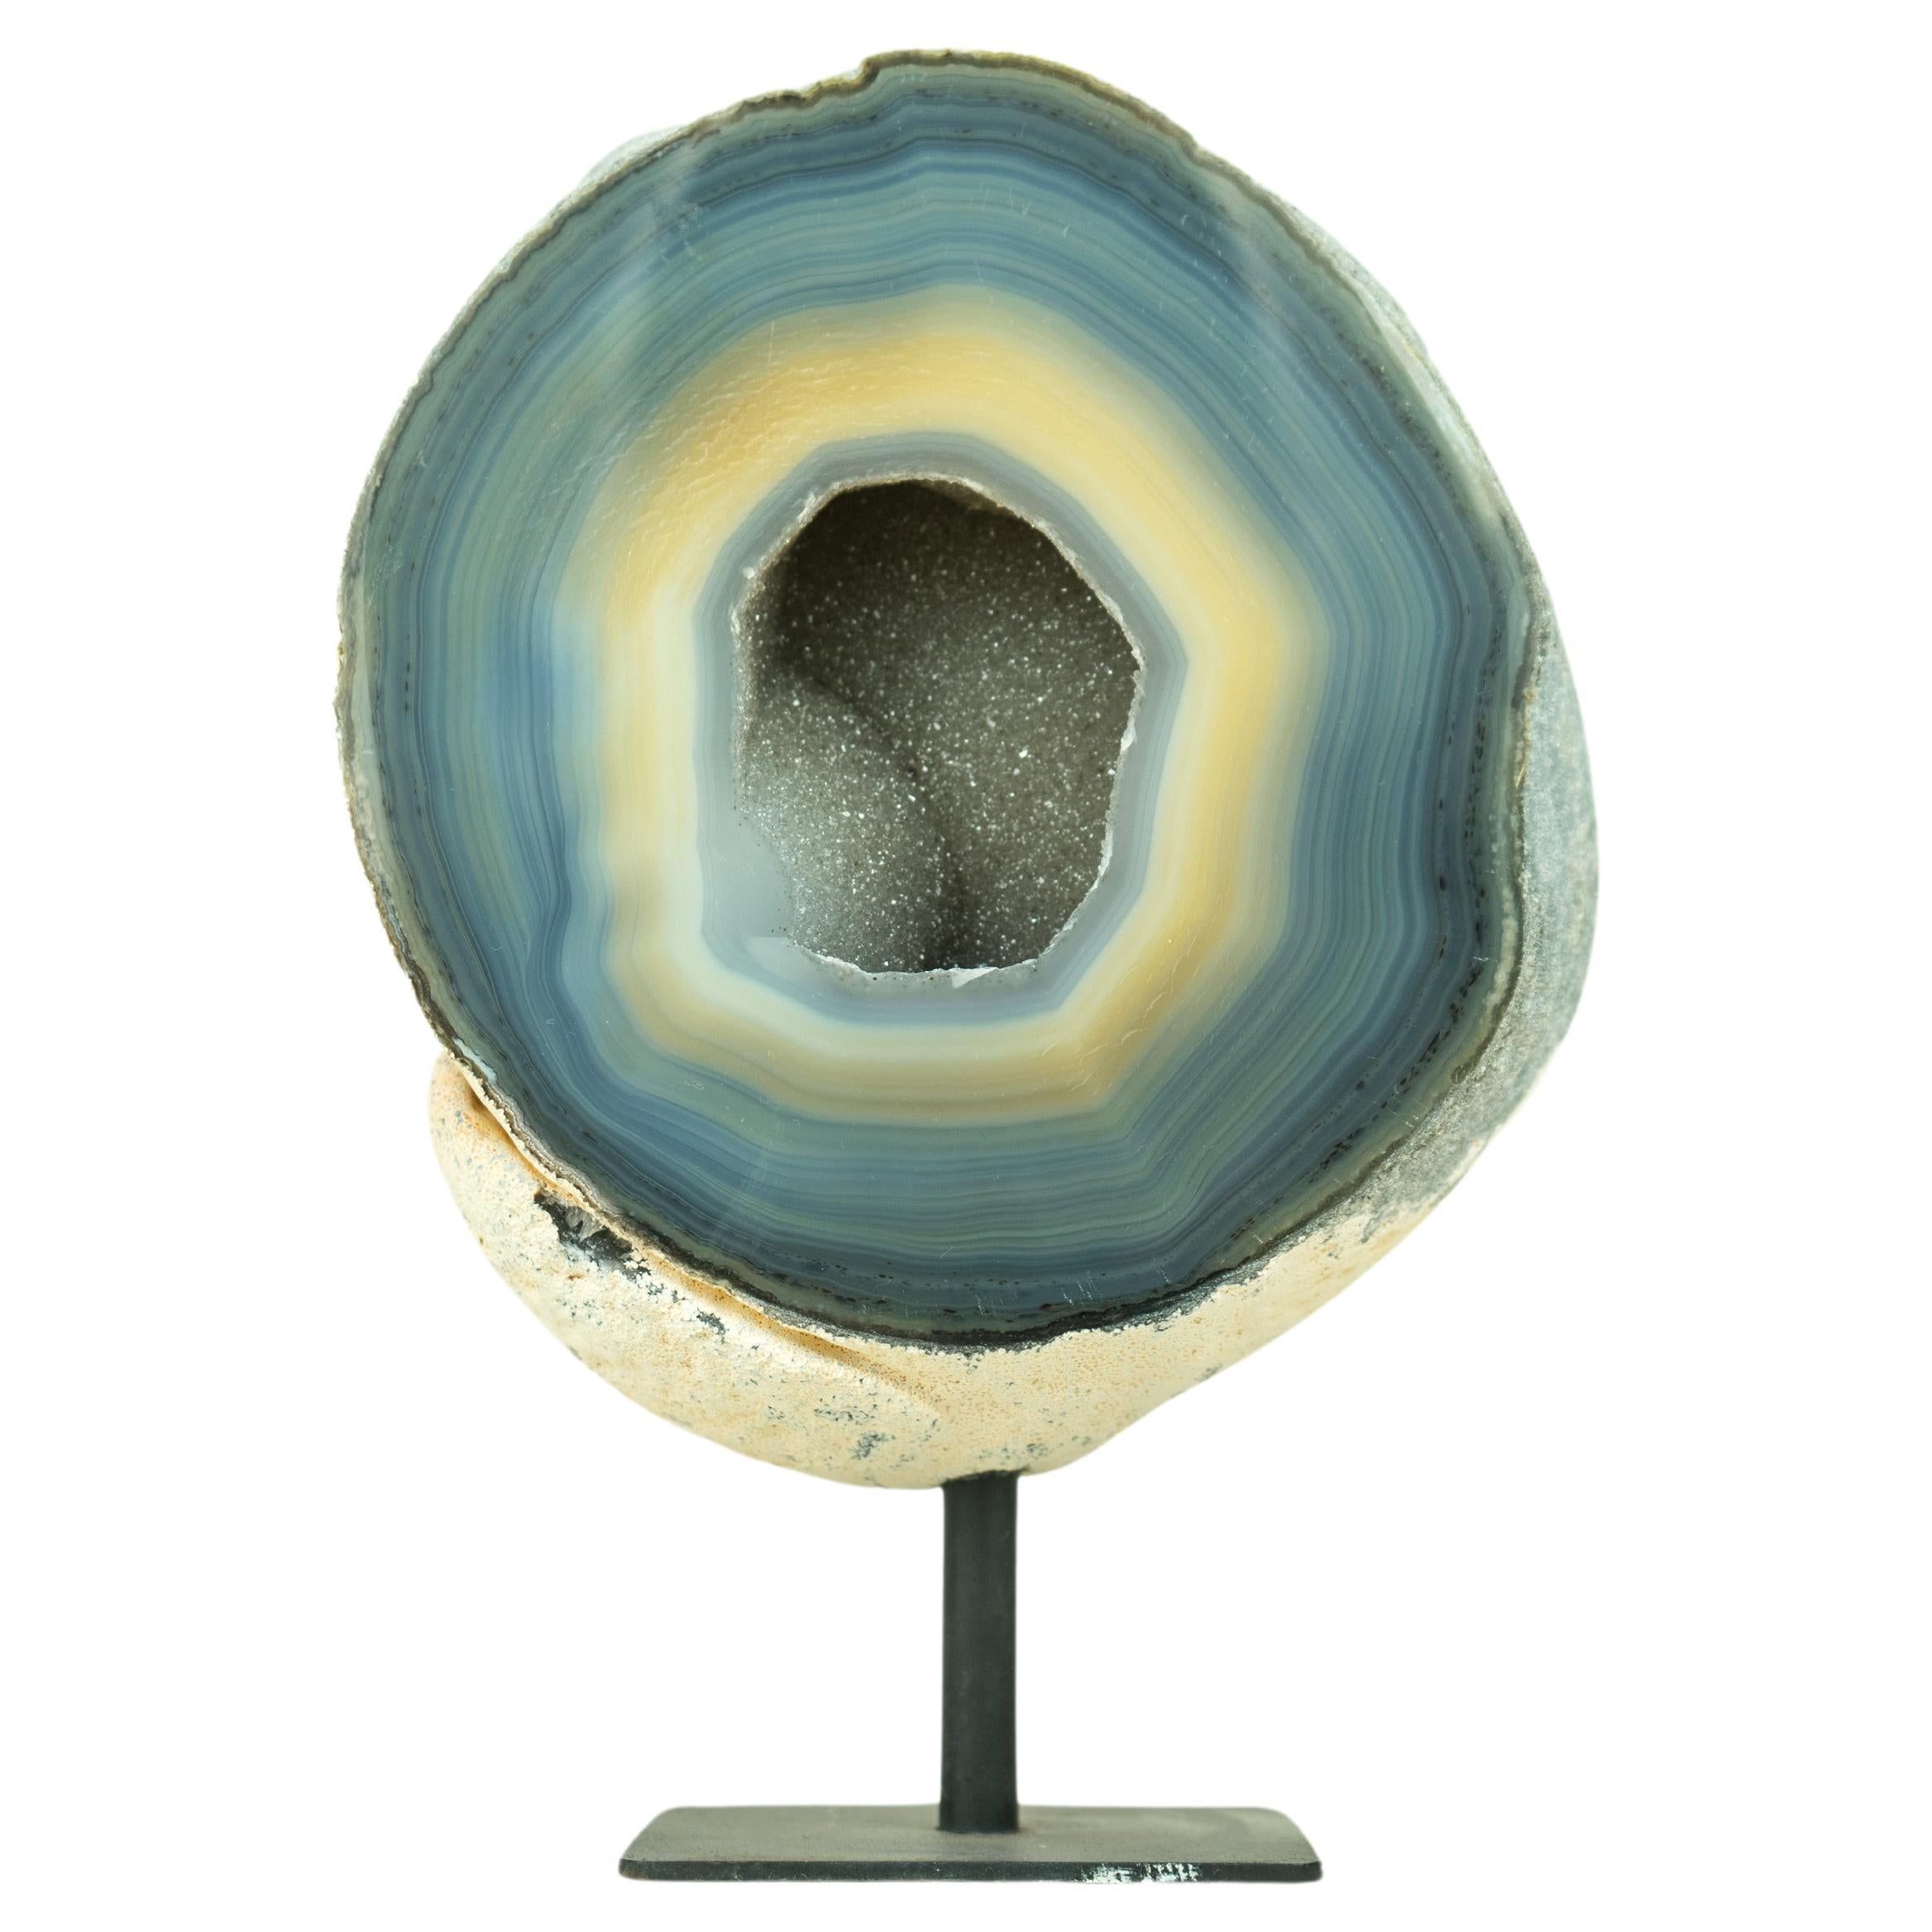 Blue and Cream Lace Agate Geode on Stand - Banded Agate Geode with Sugar For Sale